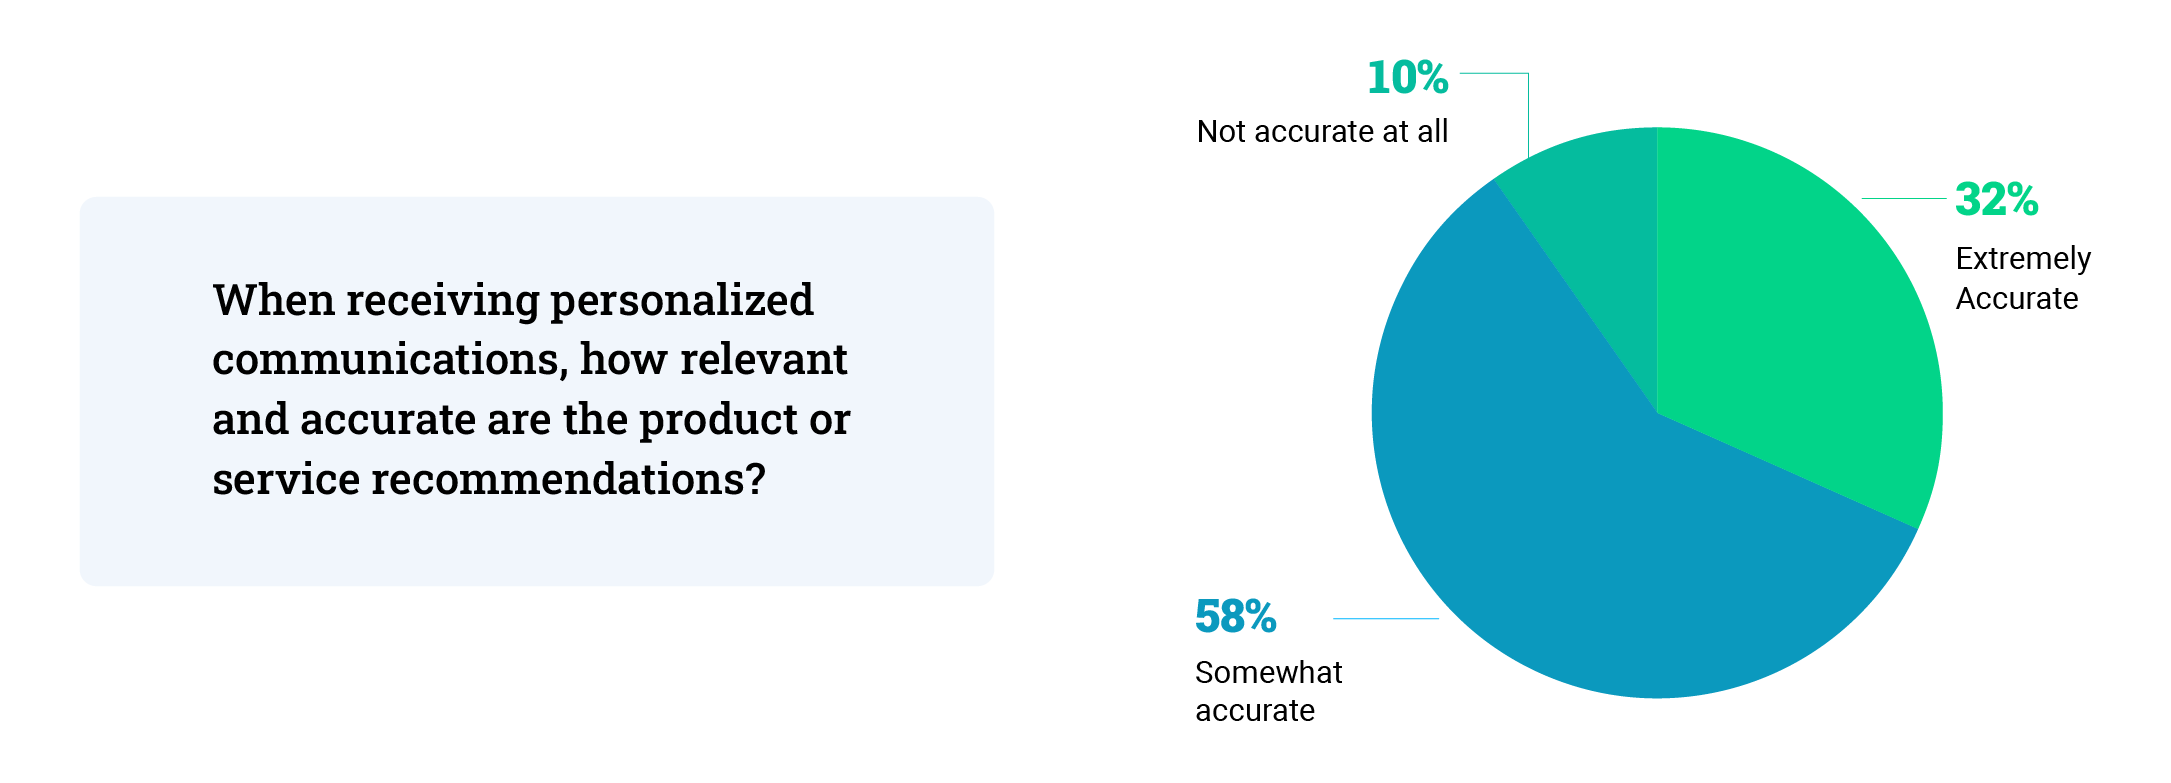 59 percent of people still think personalized recommendations are only somewhat accurate.